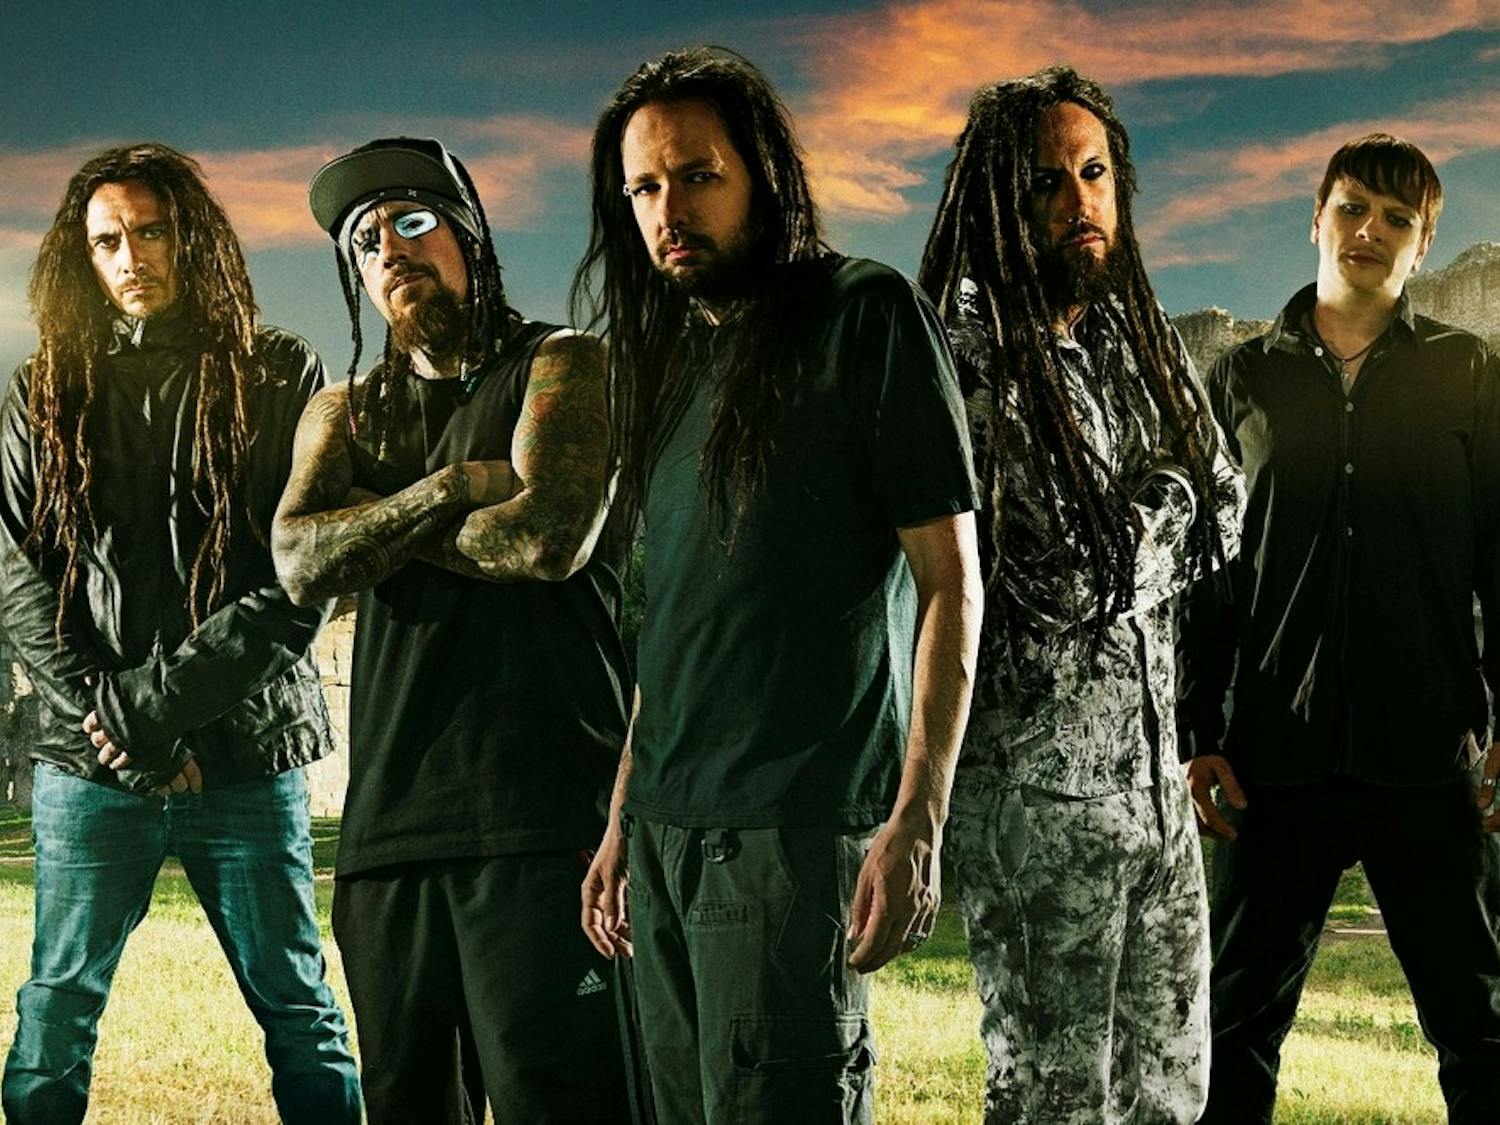 Korn will perform at the Marquee Theatre on Thursday, Oct. 22, 2015.